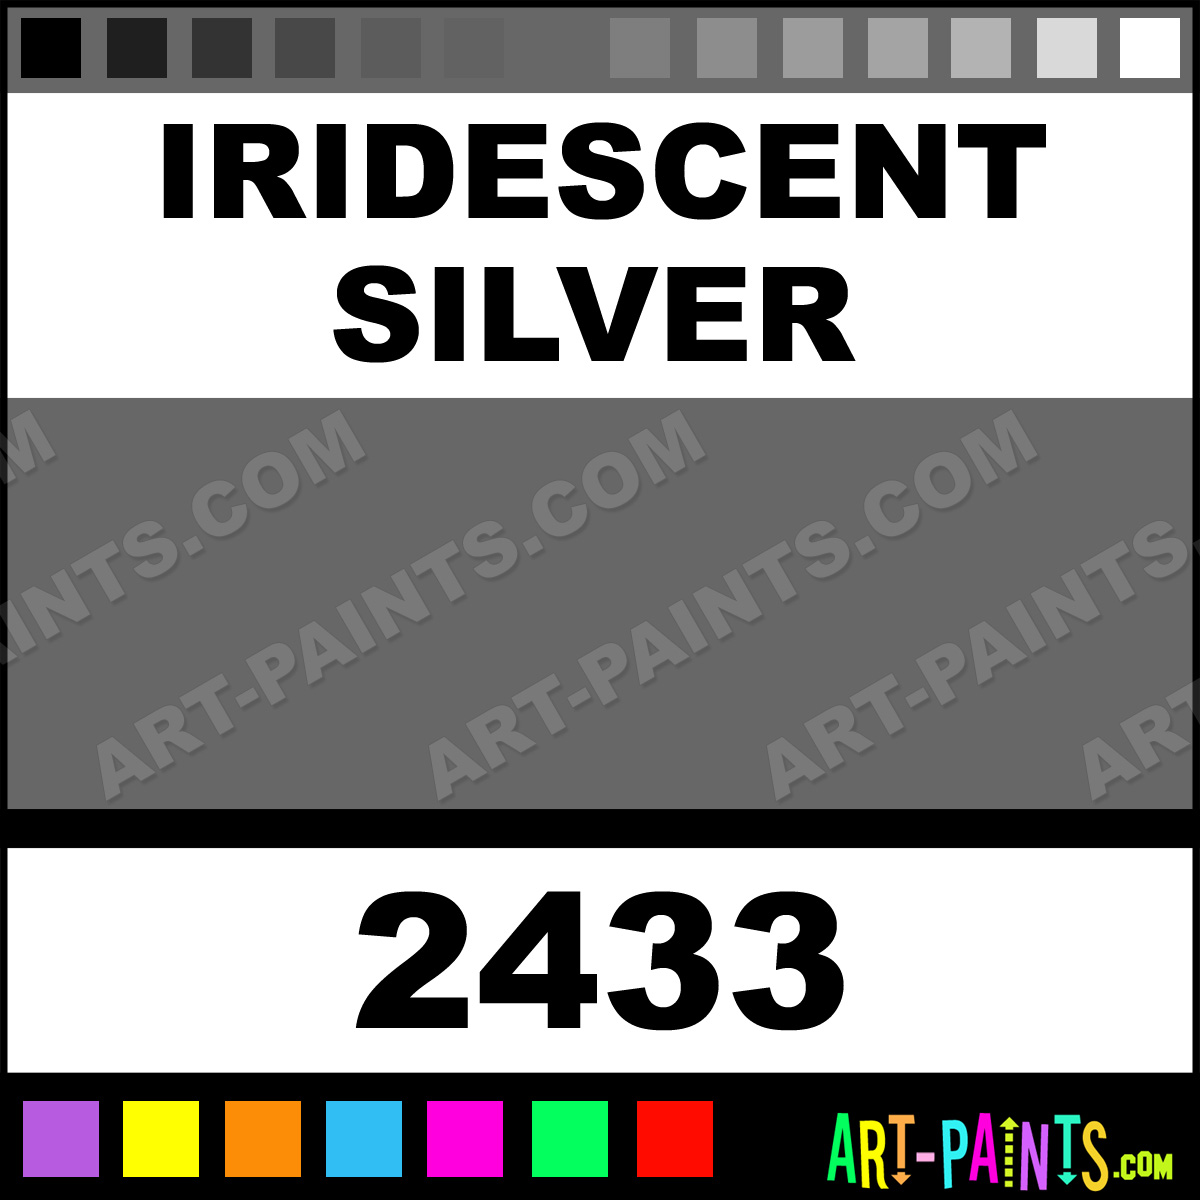 Iridescent Silver Student Acrylic Paints - 2433 - Iridescent Silver